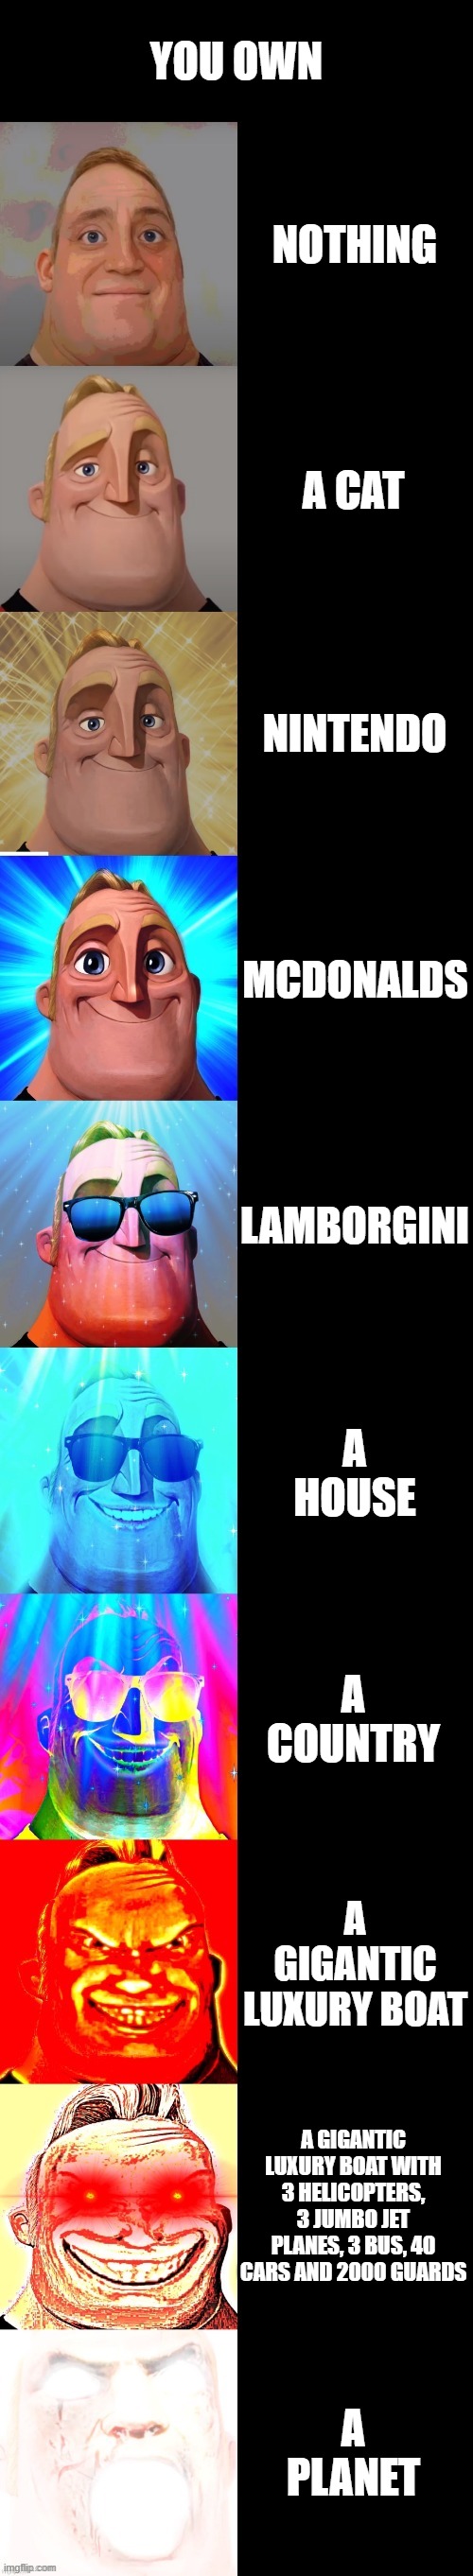 mr incredible becoming canny | YOU OWN NOTHING A CAT NINTENDO MCDONALDS LAMBORGINI A HOUSE A COUNTRY A GIGANTIC LUXURY BOAT A GIGANTIC LUXURY BOAT WITH 3 HELICOPTERS, 3 JU | image tagged in mr incredible becoming canny | made w/ Imgflip meme maker